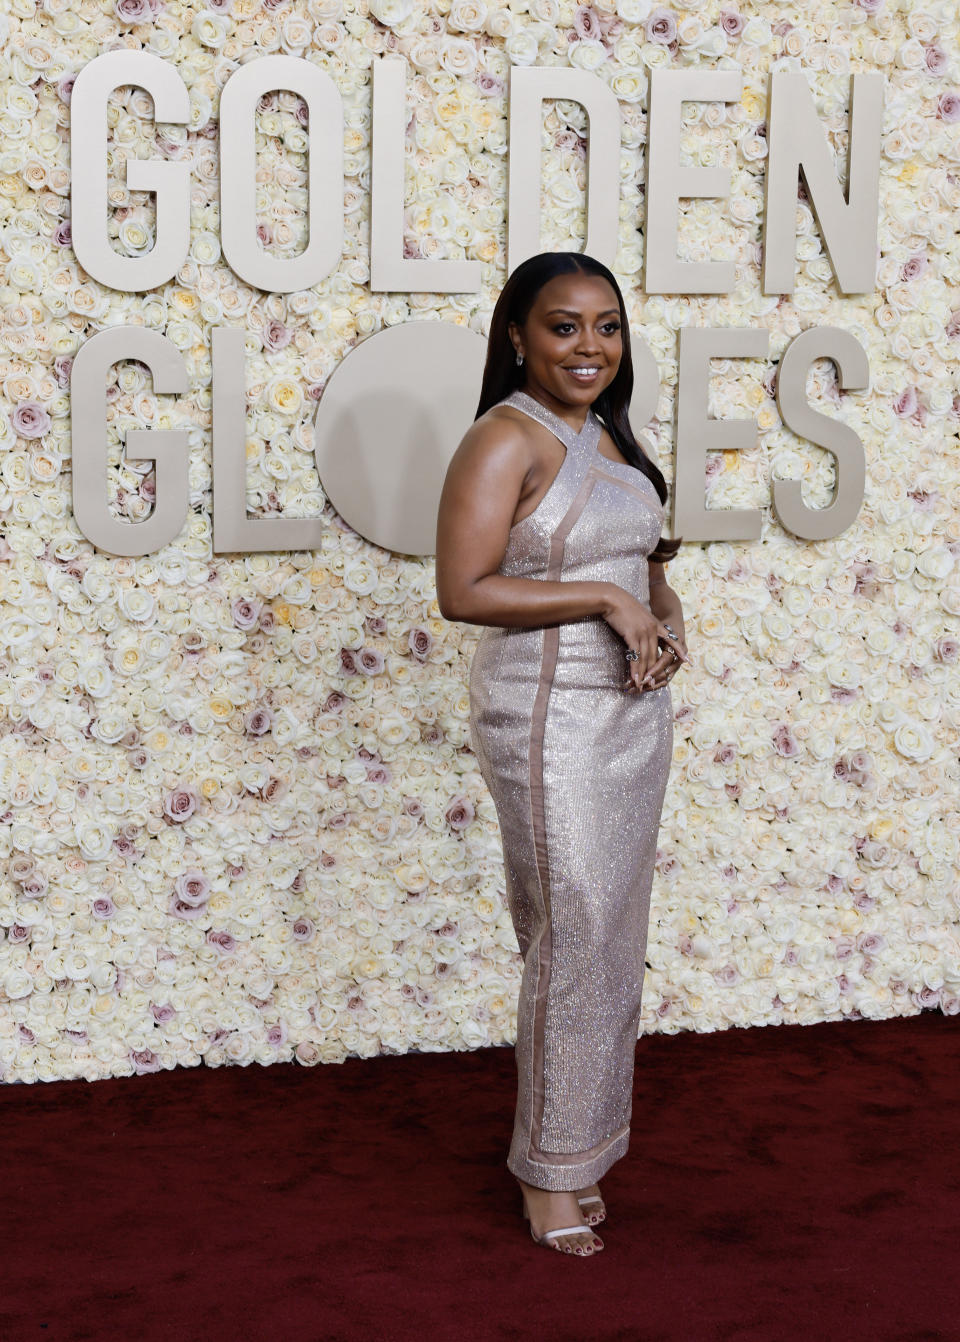 BEVERLY HILLS, CALIFORNIA - JANUARY 7: 81st GOLDEN GLOBE AWARDS -- Quinta Brunson on the red carpet of the 81st Annual Golden Globe Awards held at the Beverly Hilton Hotel on January 7, 2024.  (Photo by Robert Gauthier / Los Angeles Times via Getty Images)